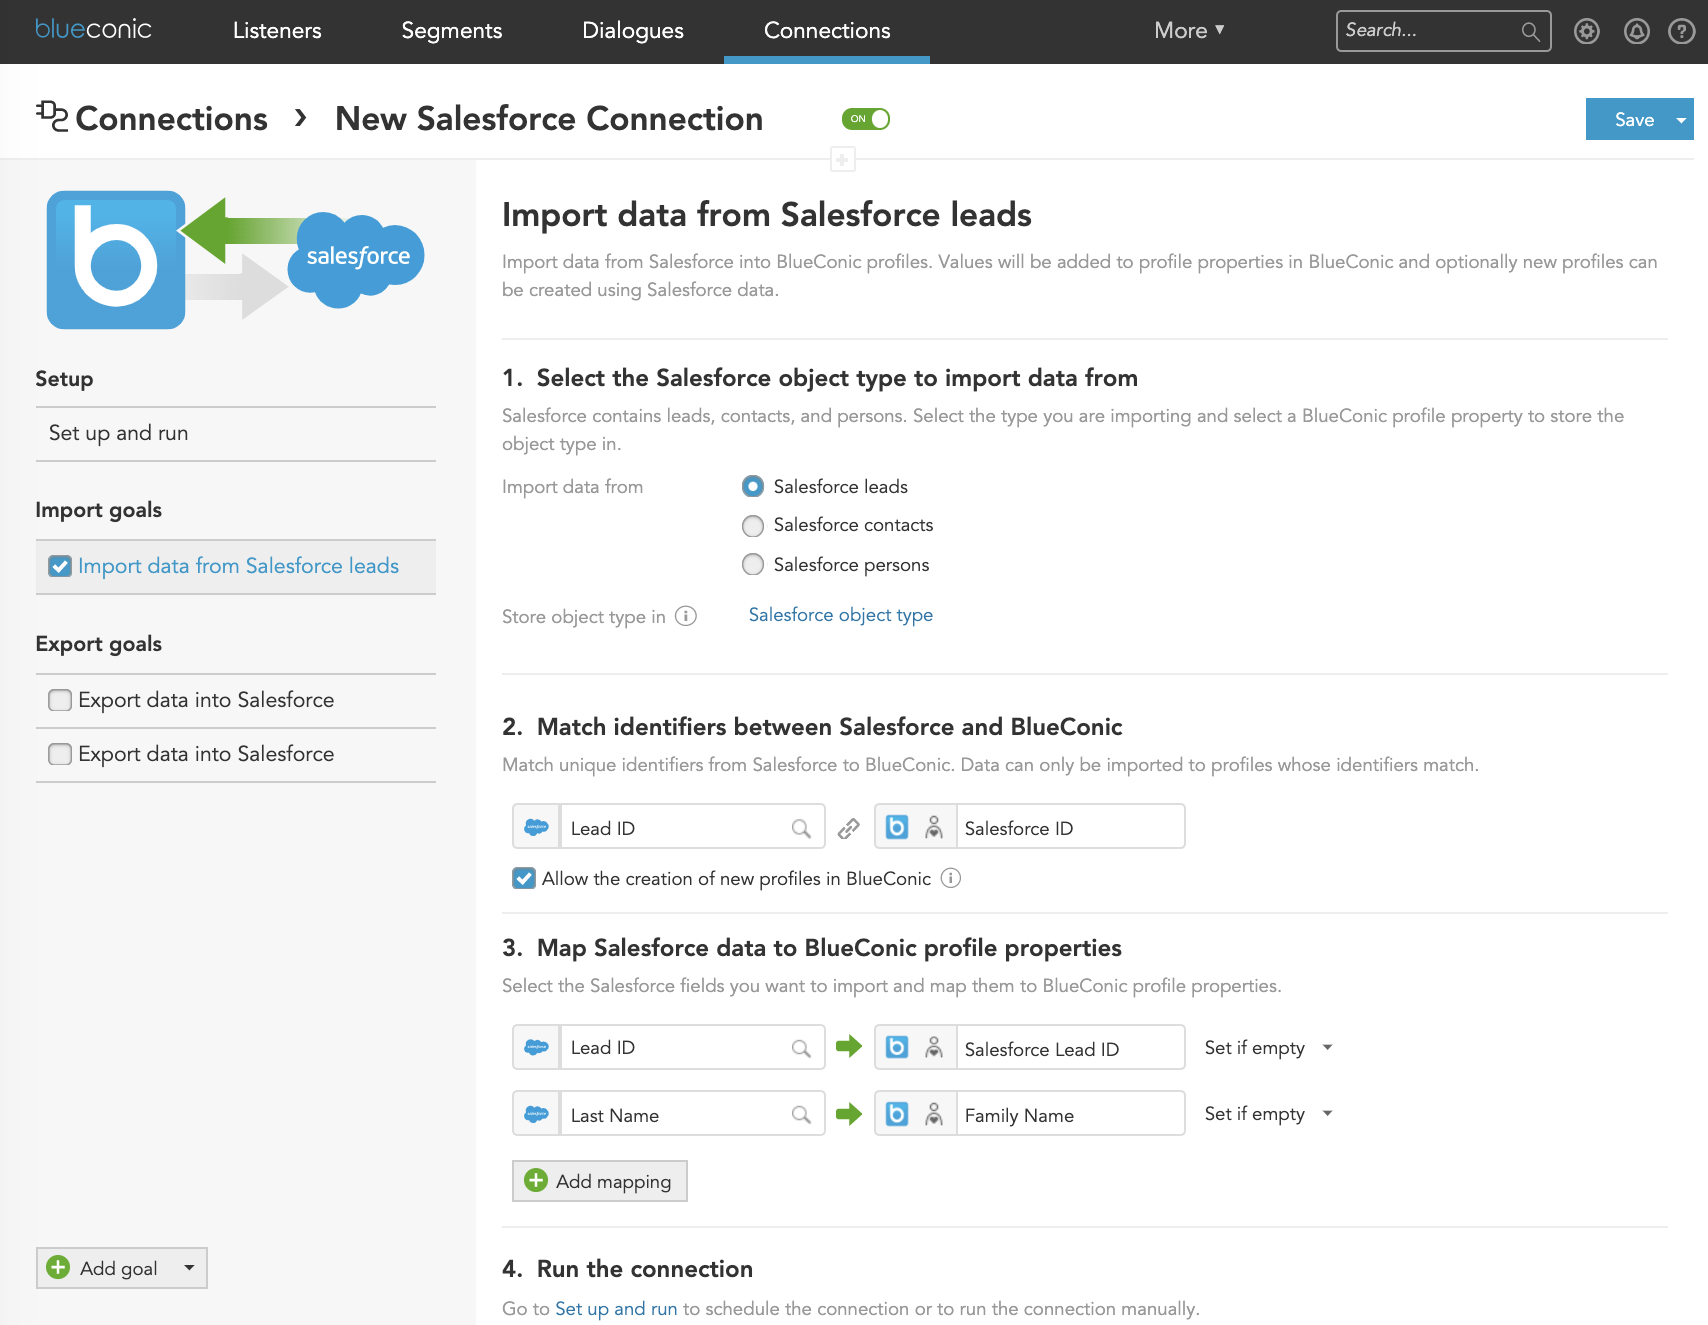 How to use the BlueConic CDP to unify customer profiles with Salesforce data